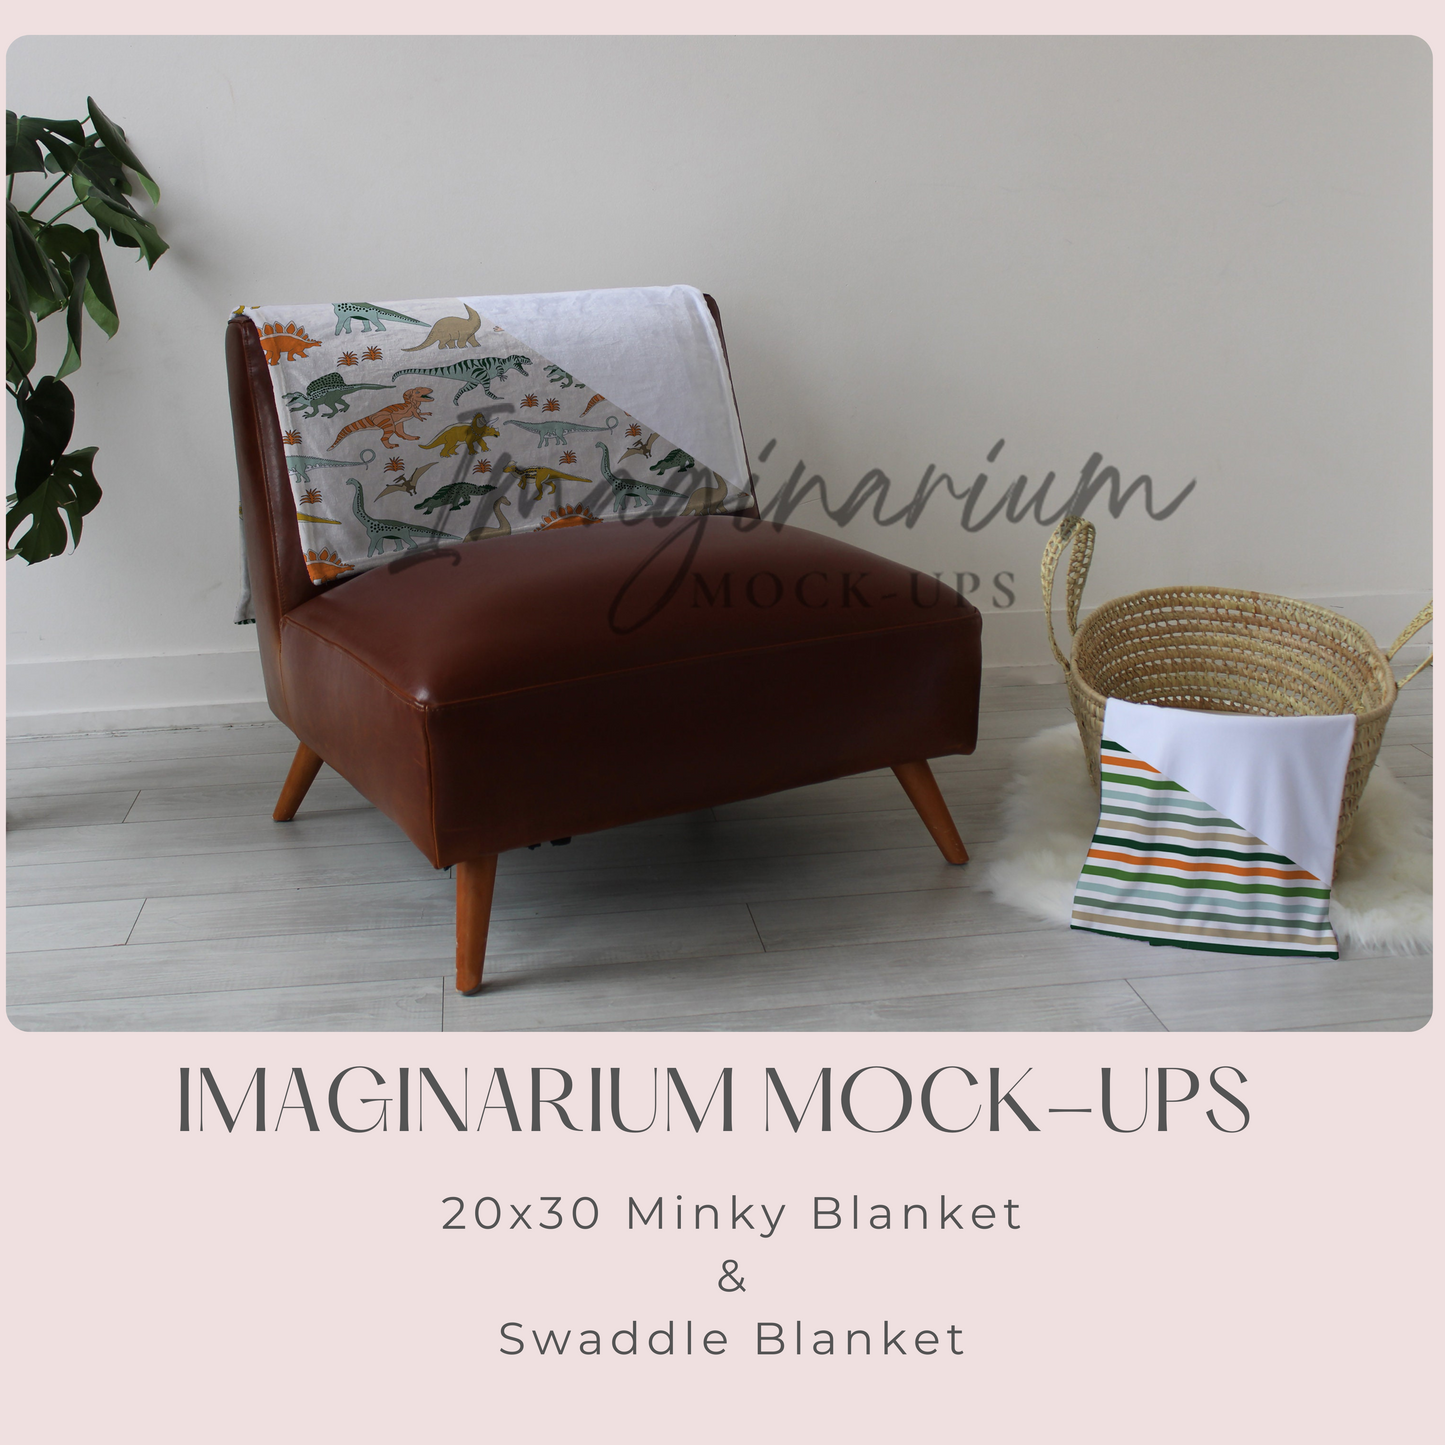 Small Minky Blanket on Chair and Swaddle Blanket in Moses Basket Mockup, Realistic Mock Up for Photoshop and Procreate